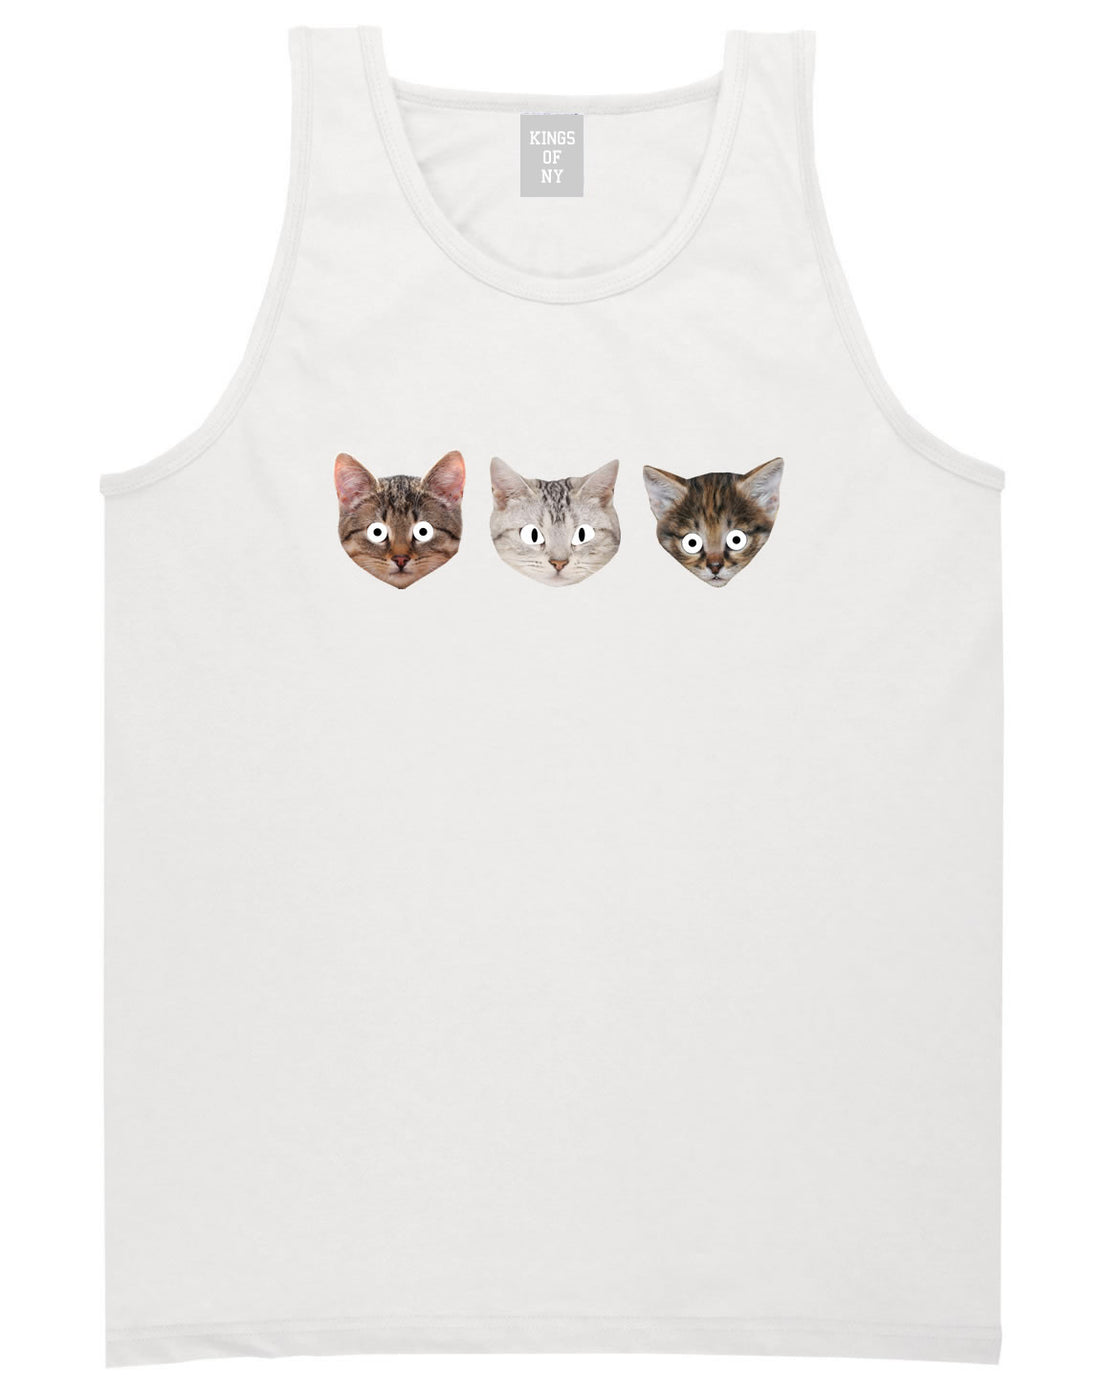 Cats Crazy Kittens Tank Top in White By Kings Of NY